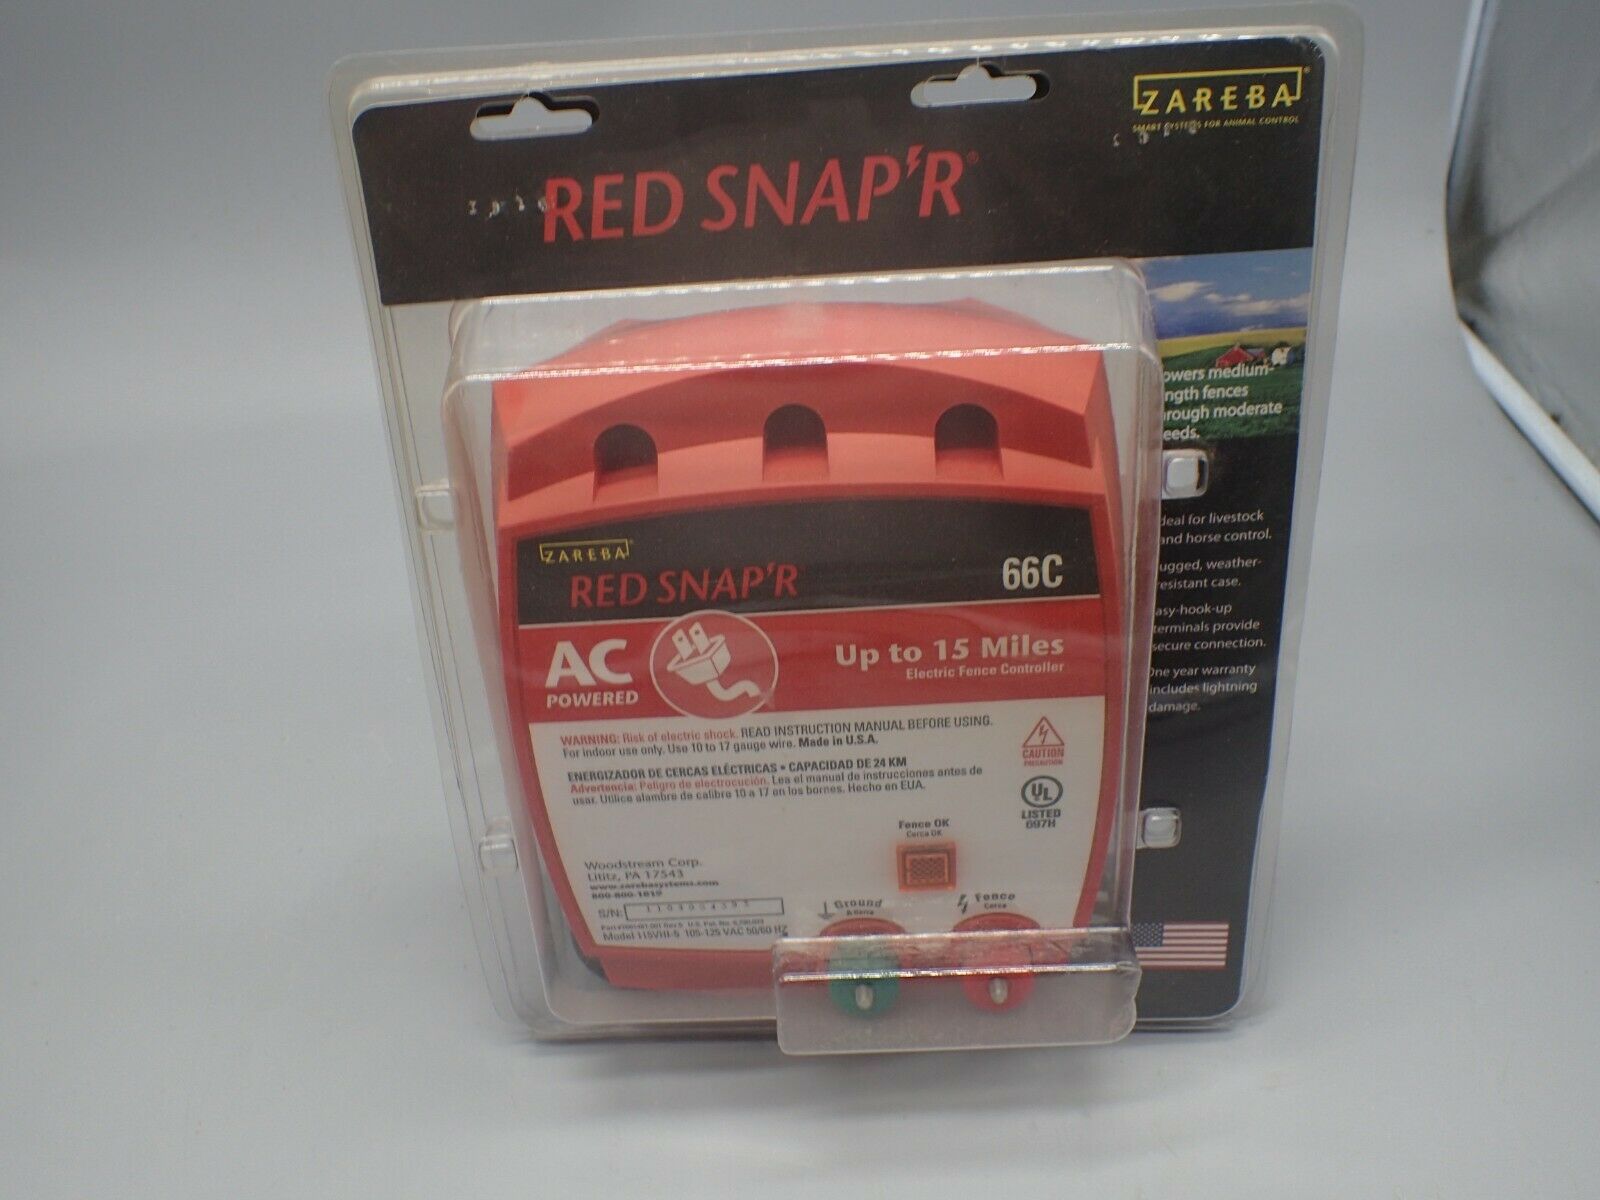 New Zareba Red Snap'r 66c Ac Powered Electric Fence Charger Up To 15 Miles